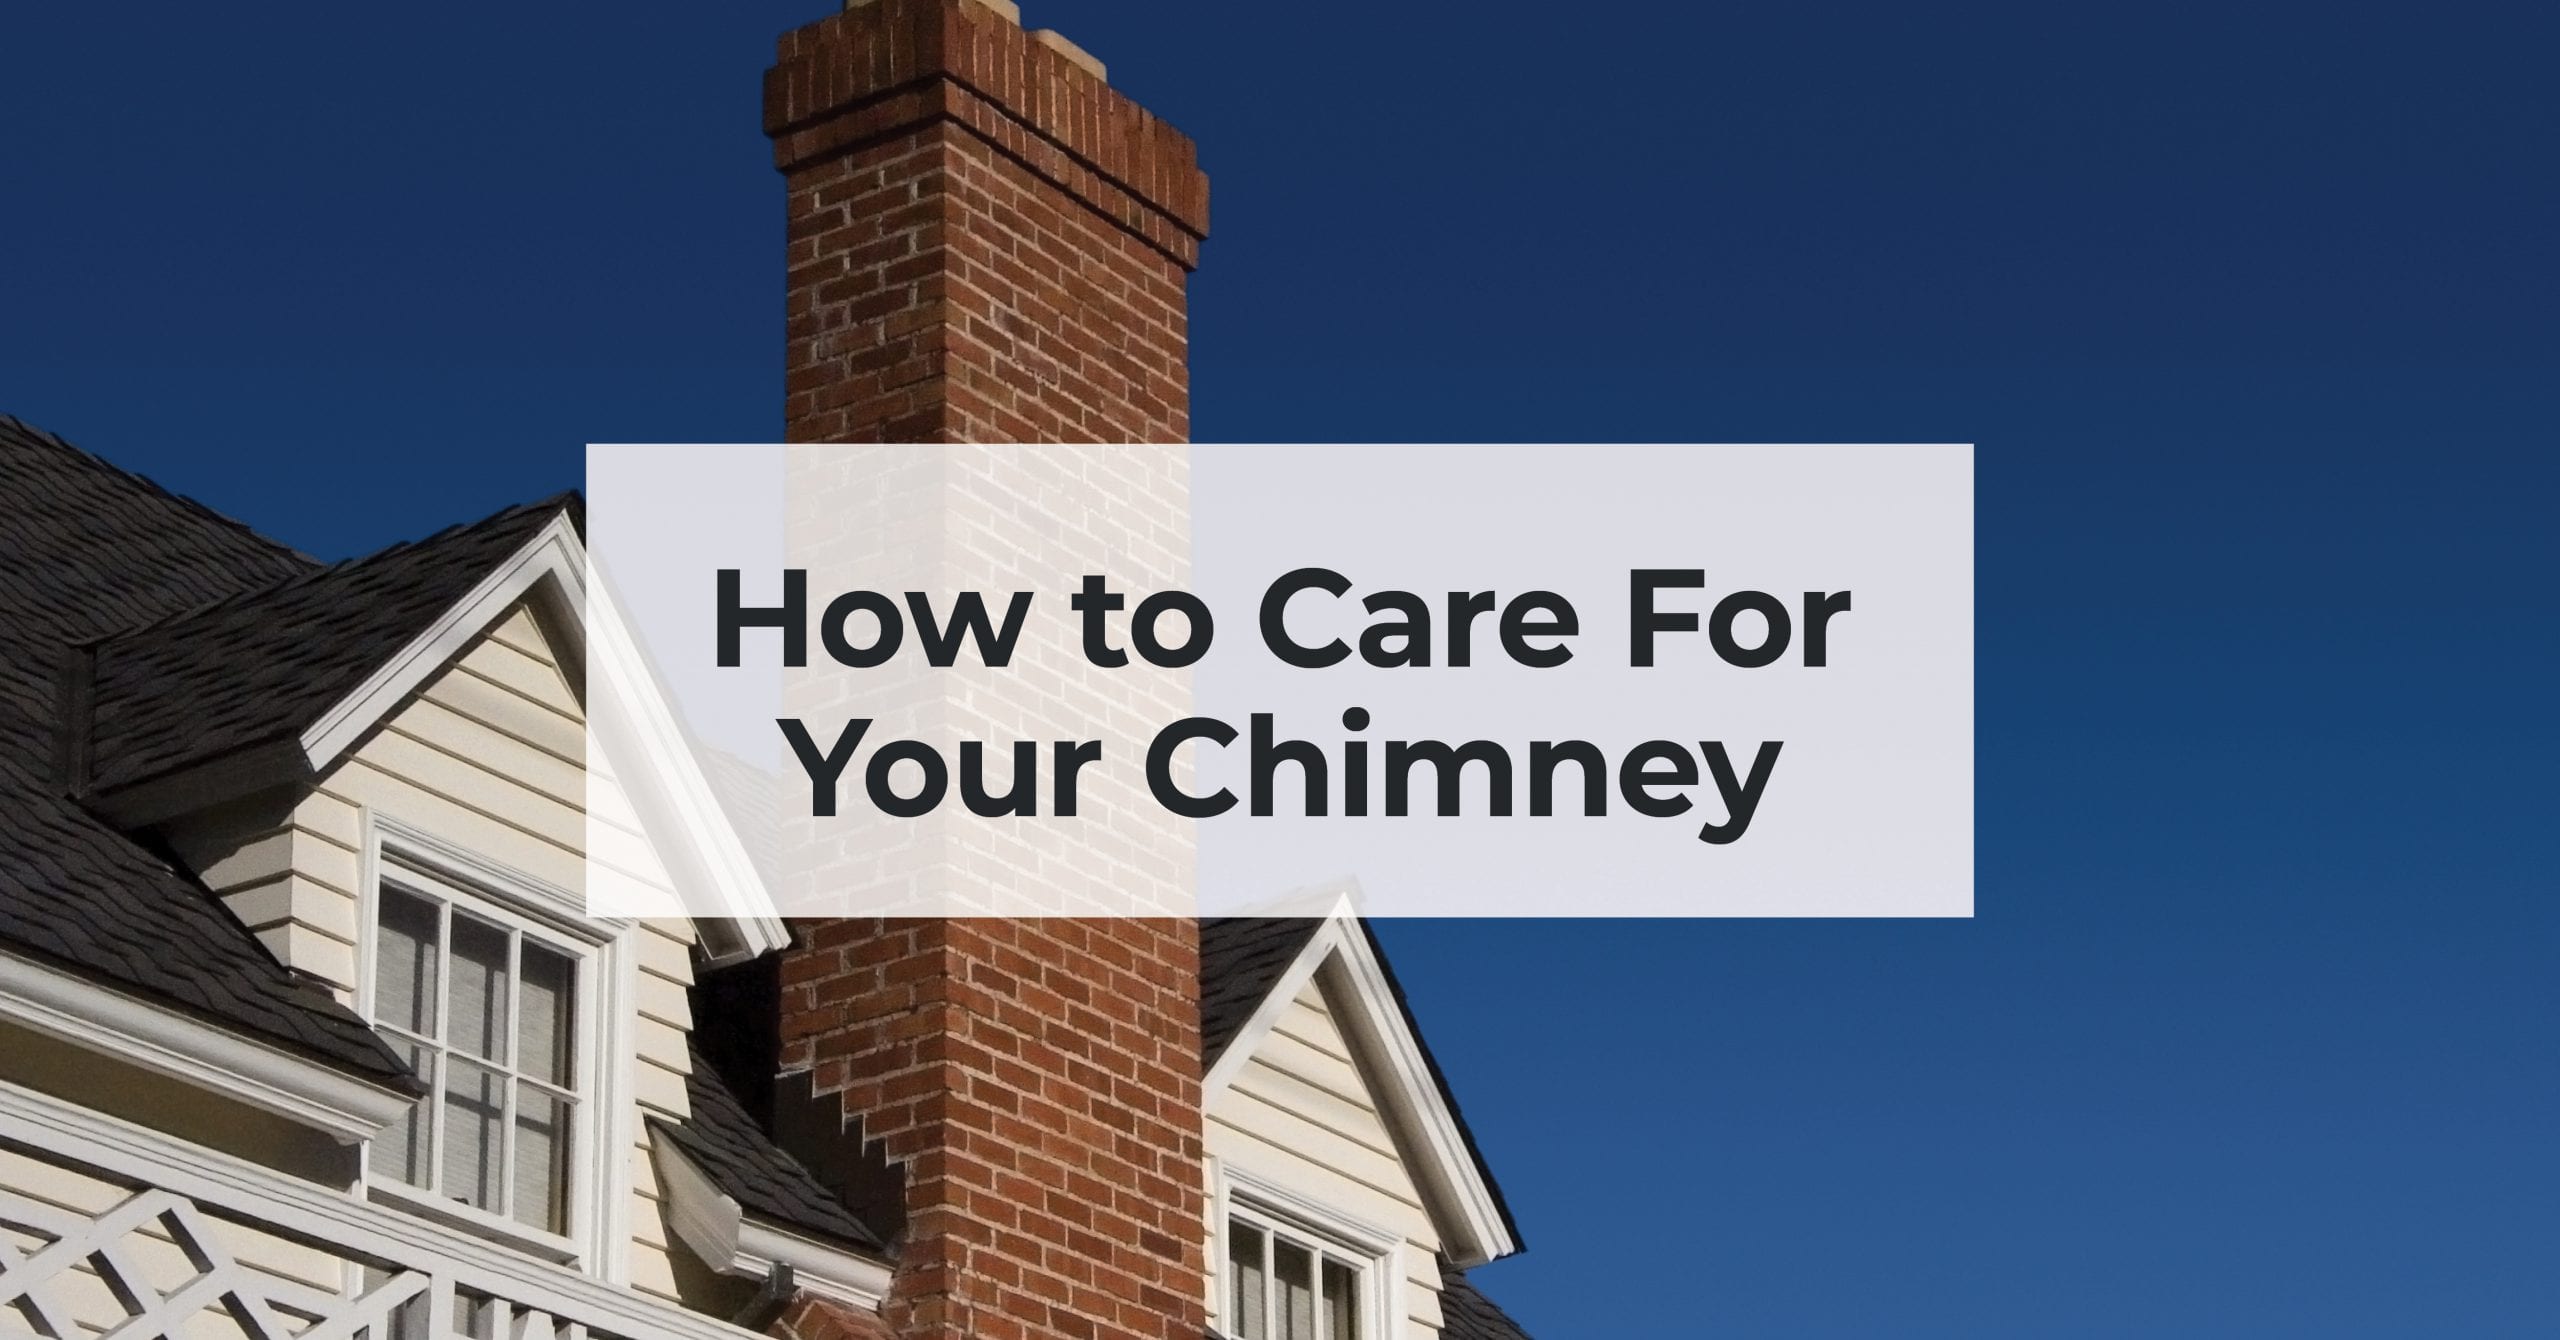 How to Care For Your Chimney